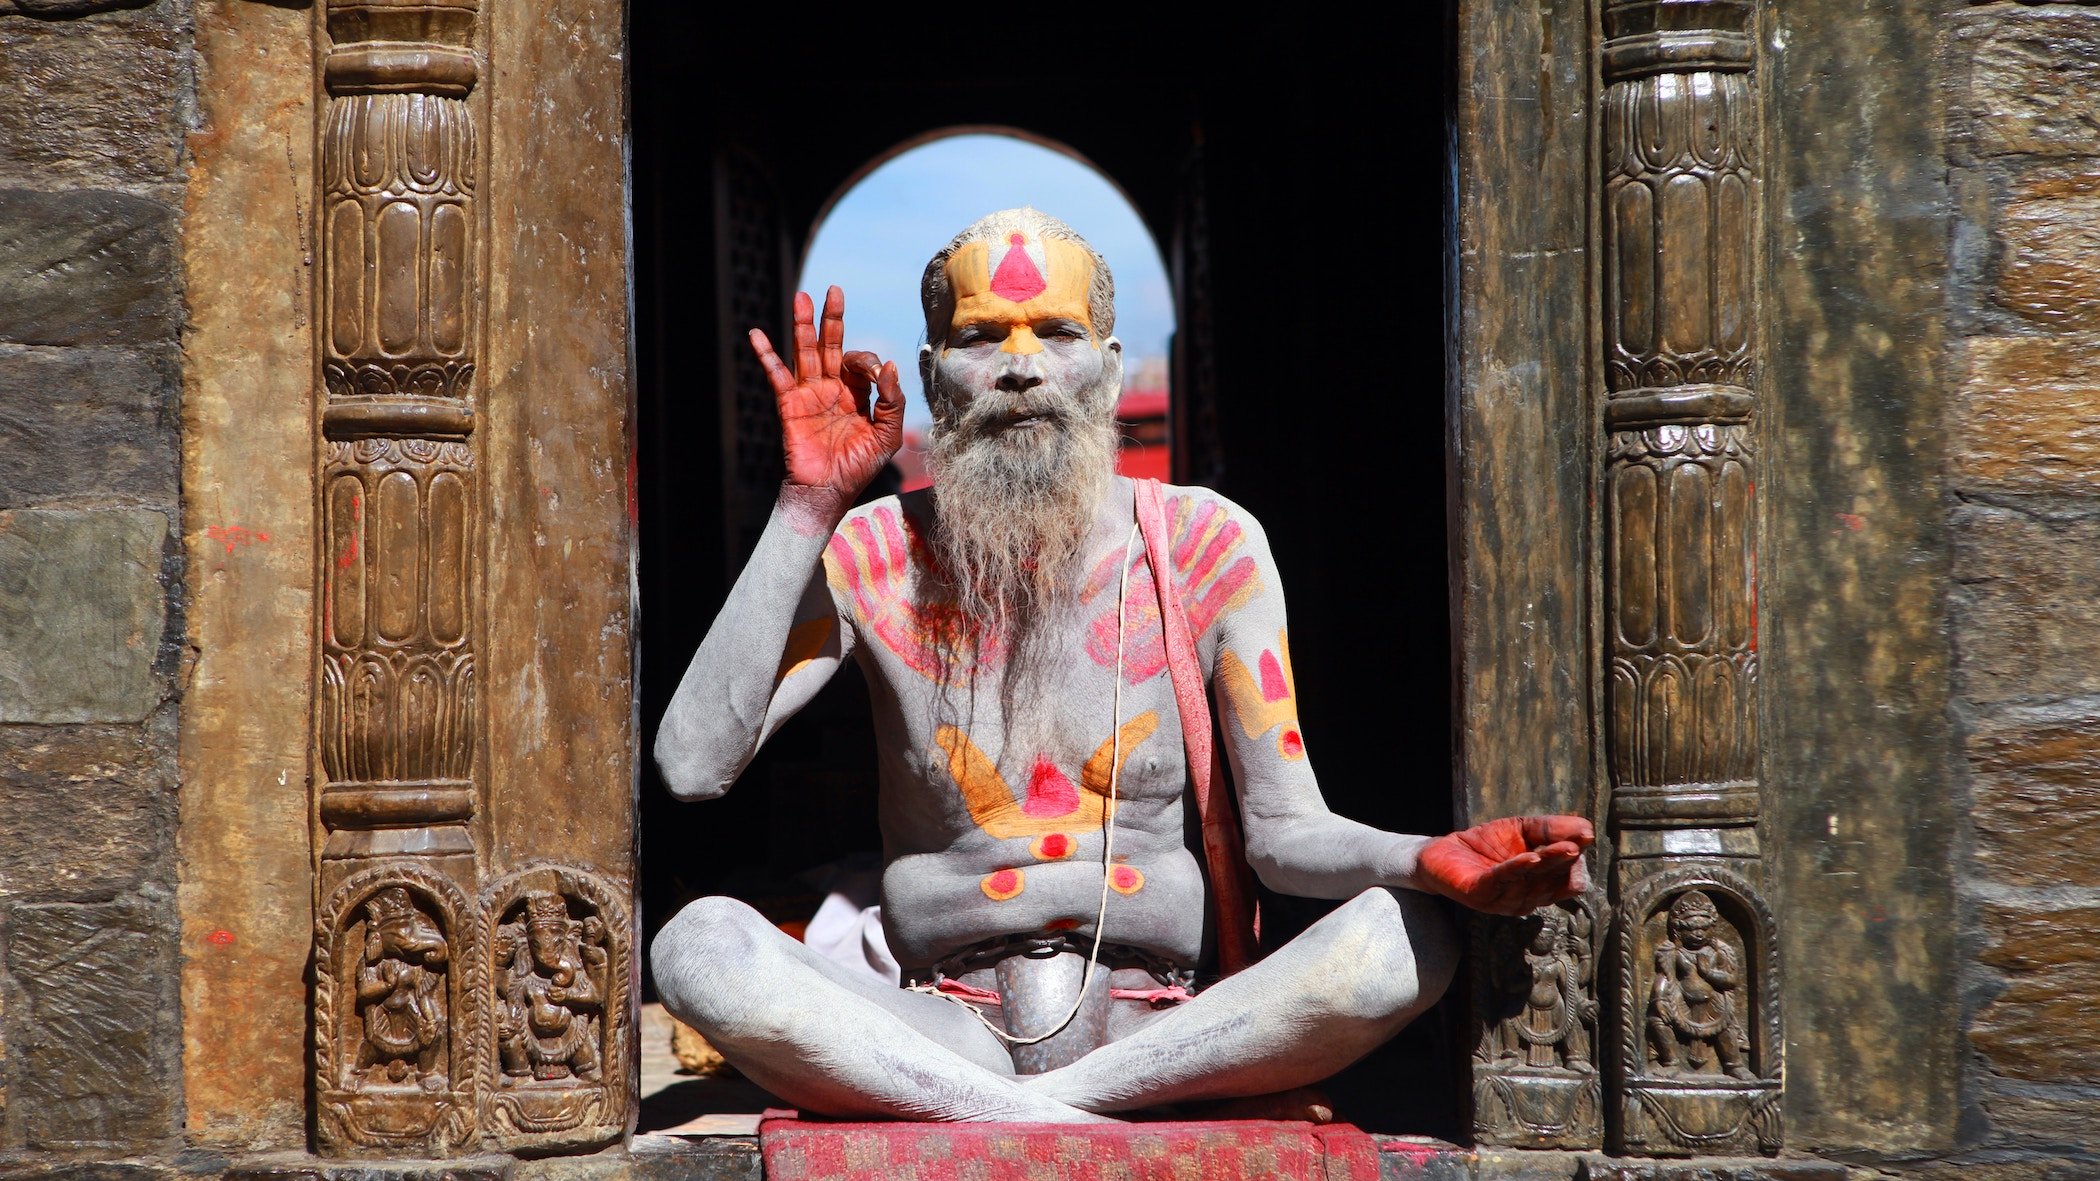 Man covered in body paint meditating in the sun, the fingers on his right hand forming an "OK" symbol.